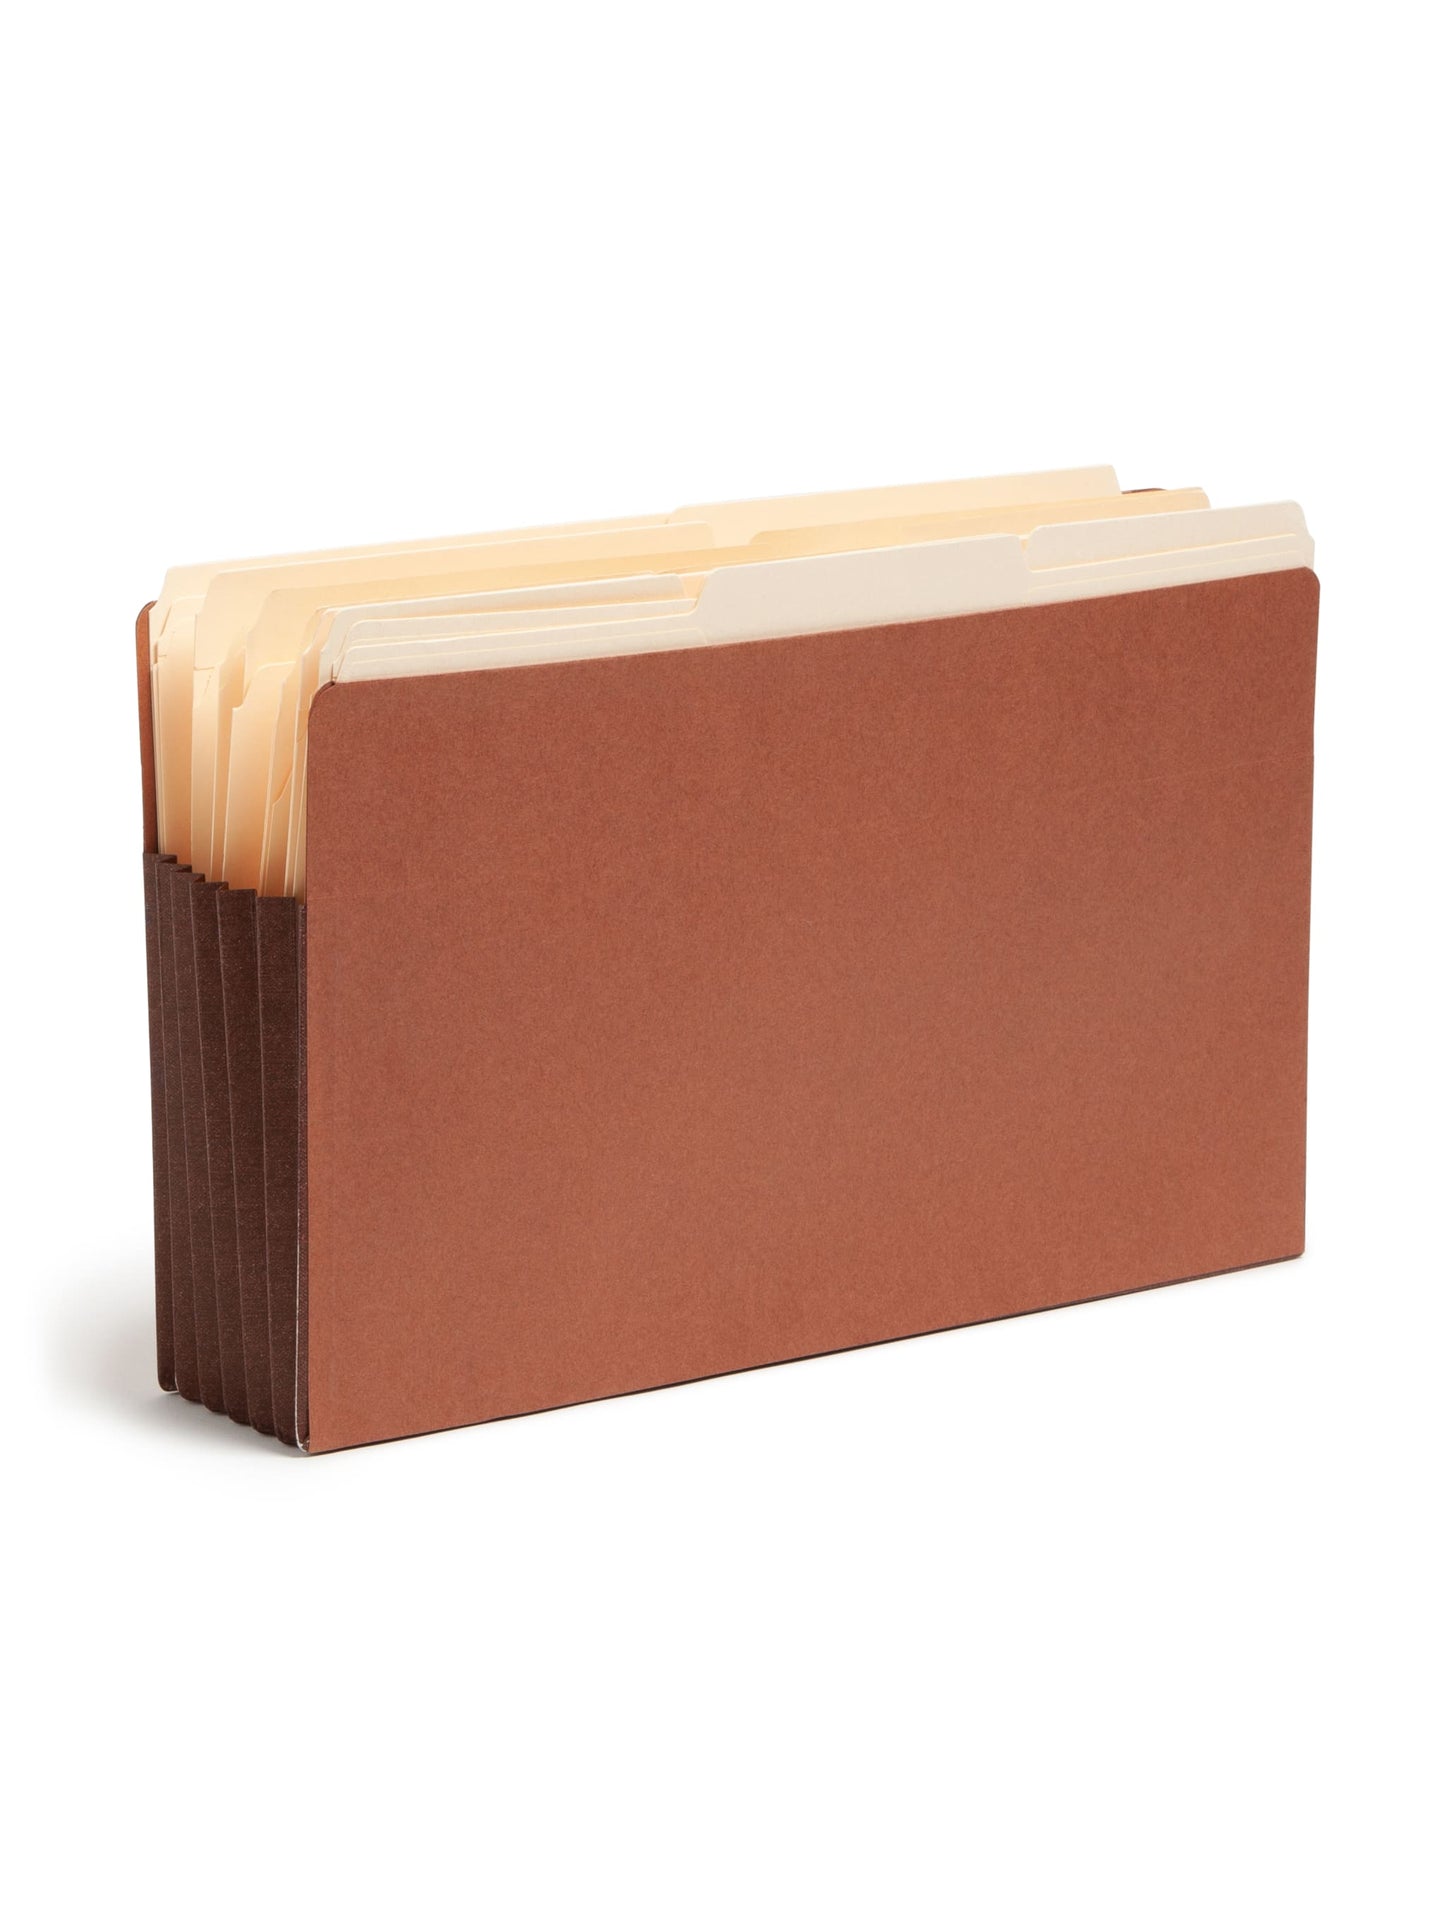 Reinforced End Tab File Pockets, Straight-Cut Tab, 5-1/4 inch Expansion, Dark Brown Color, Extra Wide Legal Size, Set of 0, 30086486746916